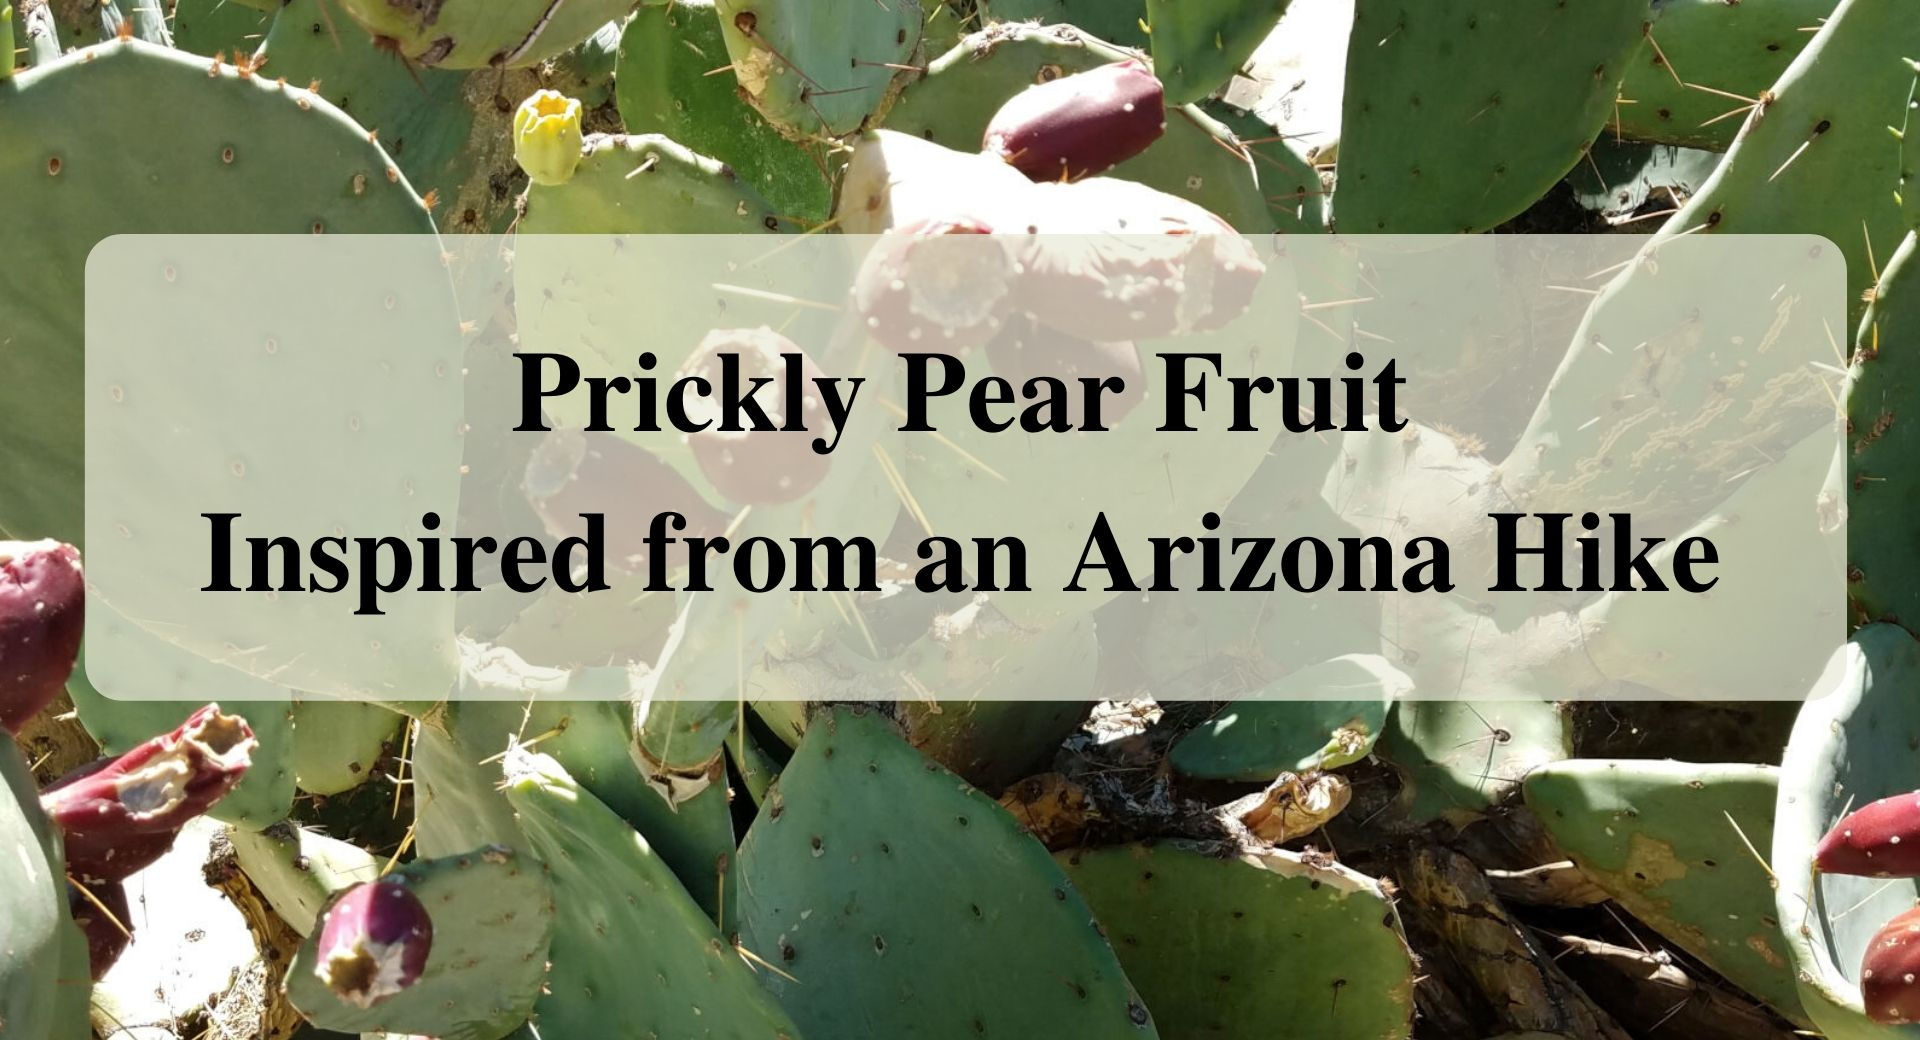 Prickly Pear Fruit Inspired from an Arizona Hike Forever sabbatical